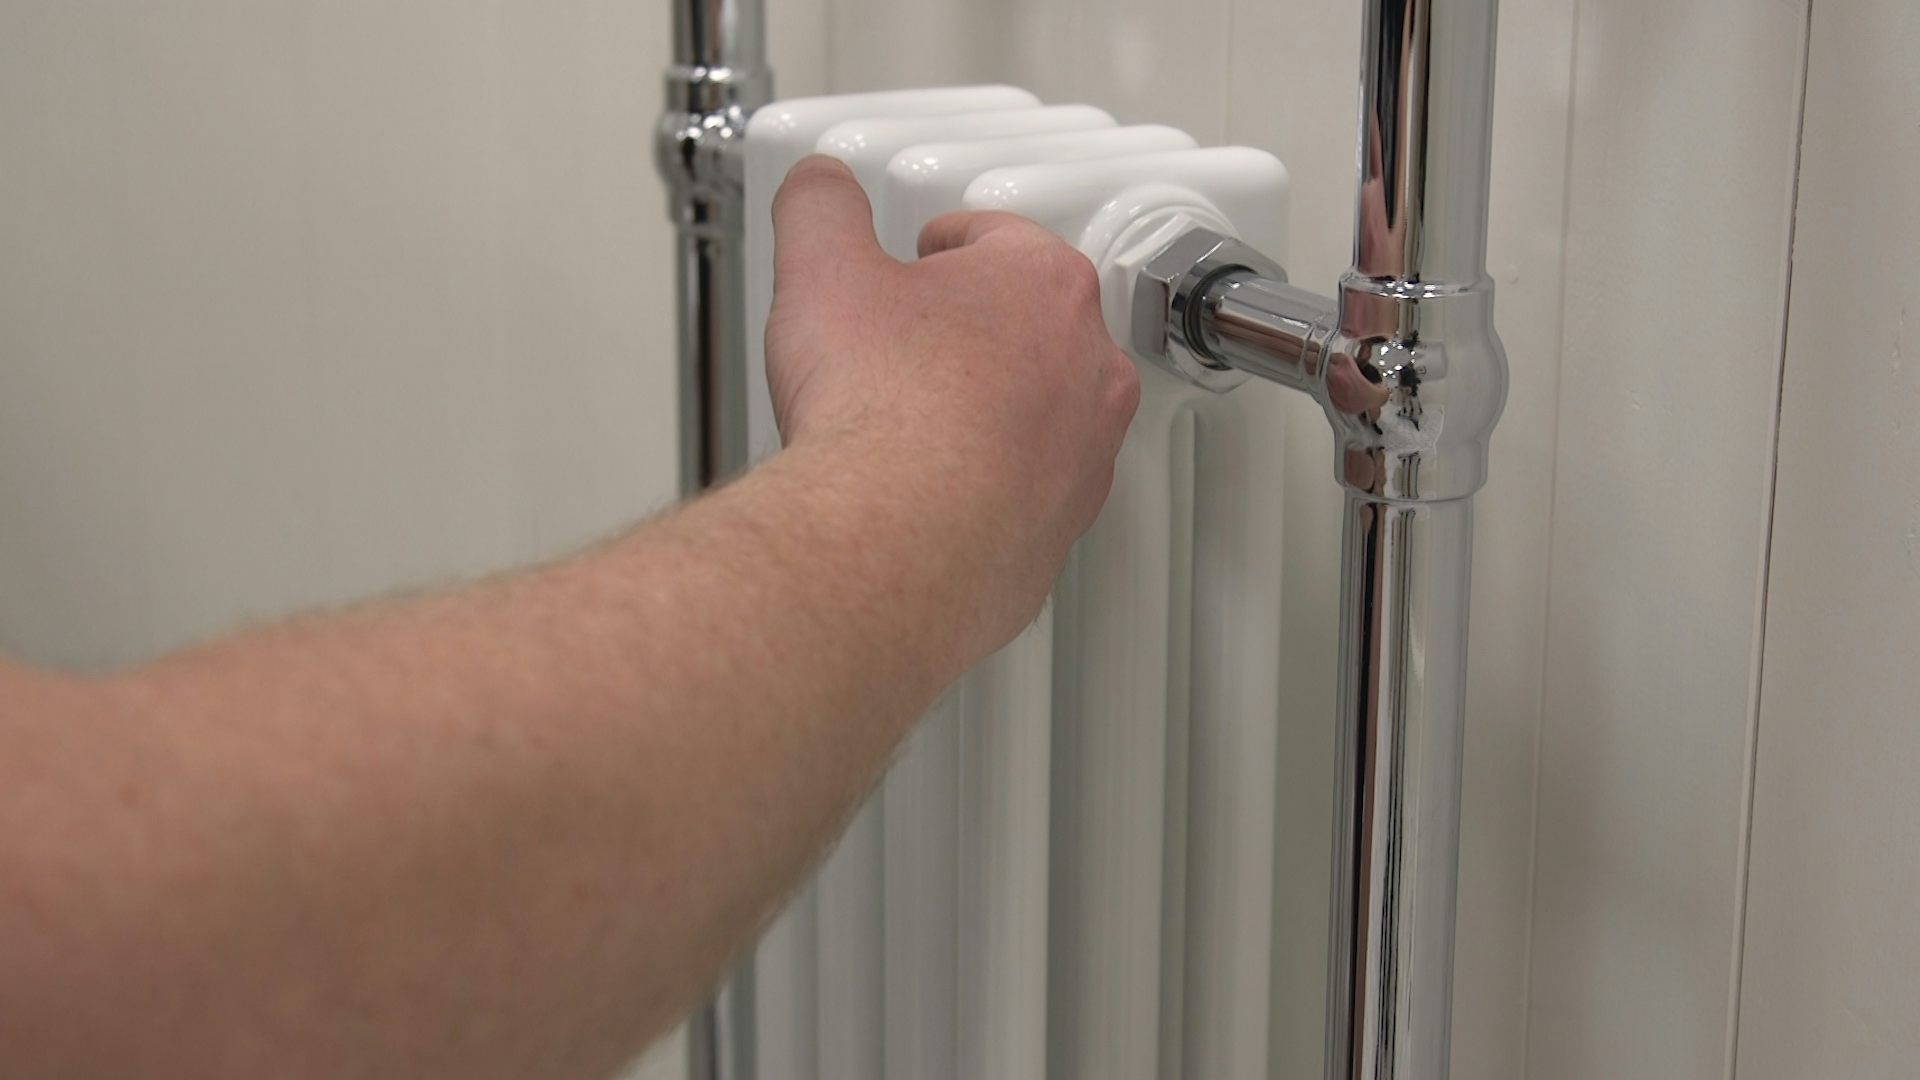 Check radiators or heated towel radiator for cold spots